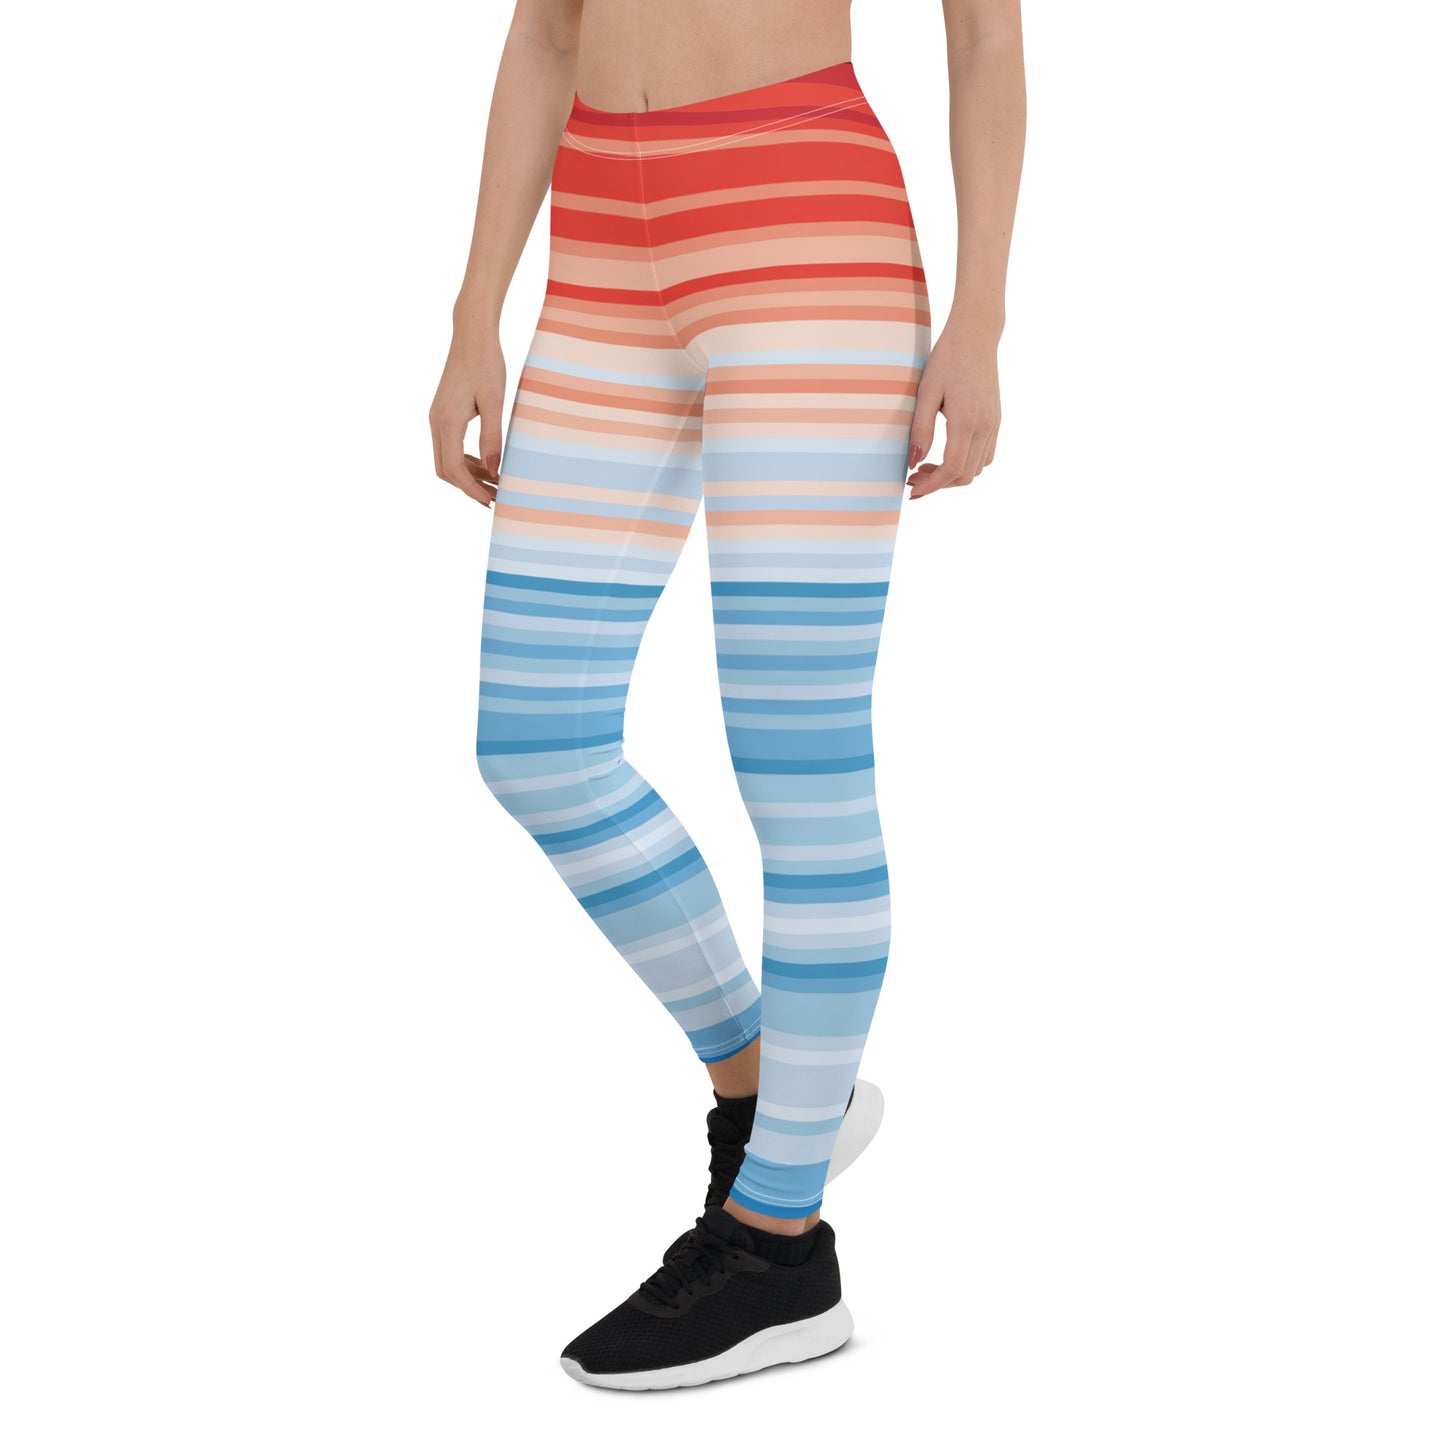 Climate Change Global Warming Stripes - Sustainably Made Leggings